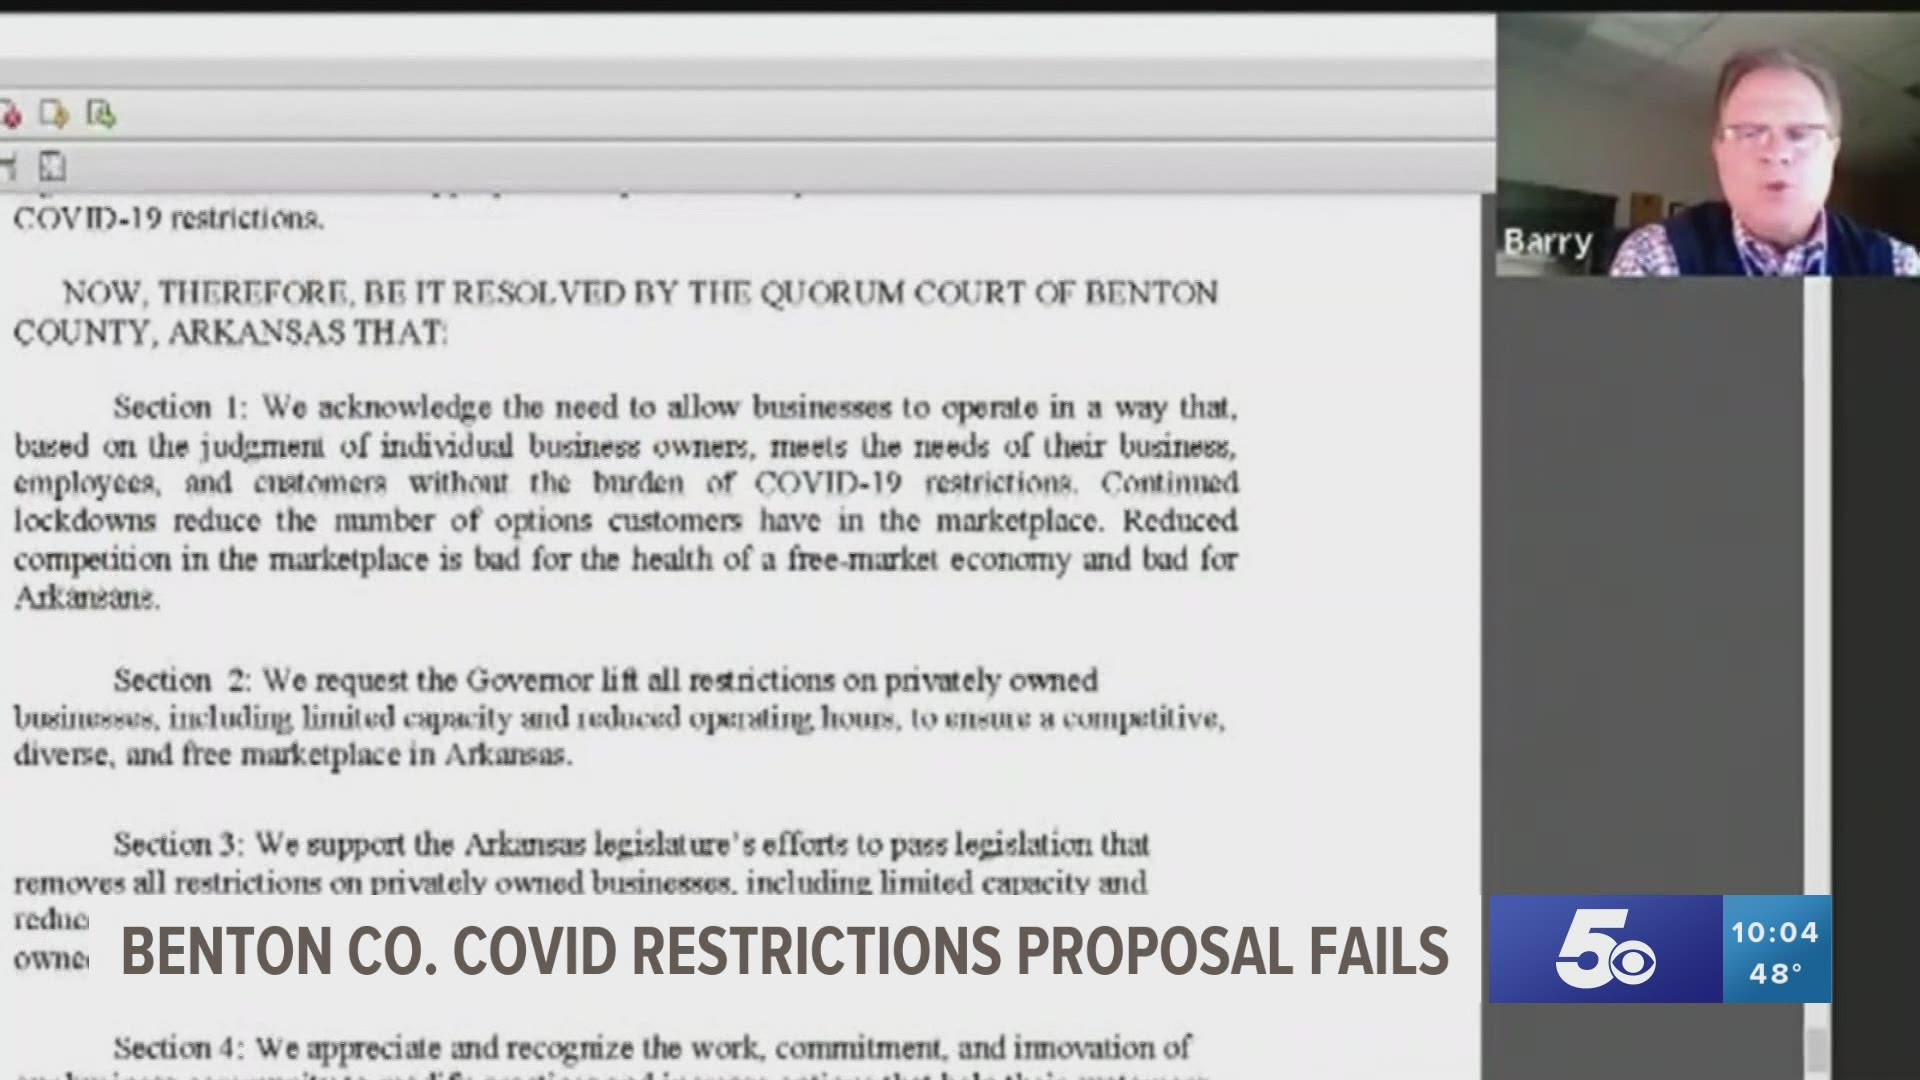 Since the Benton County Quorum Court has no authority to change any laws, the resolution would have only served as a request to Governor Asa Hutchinson.